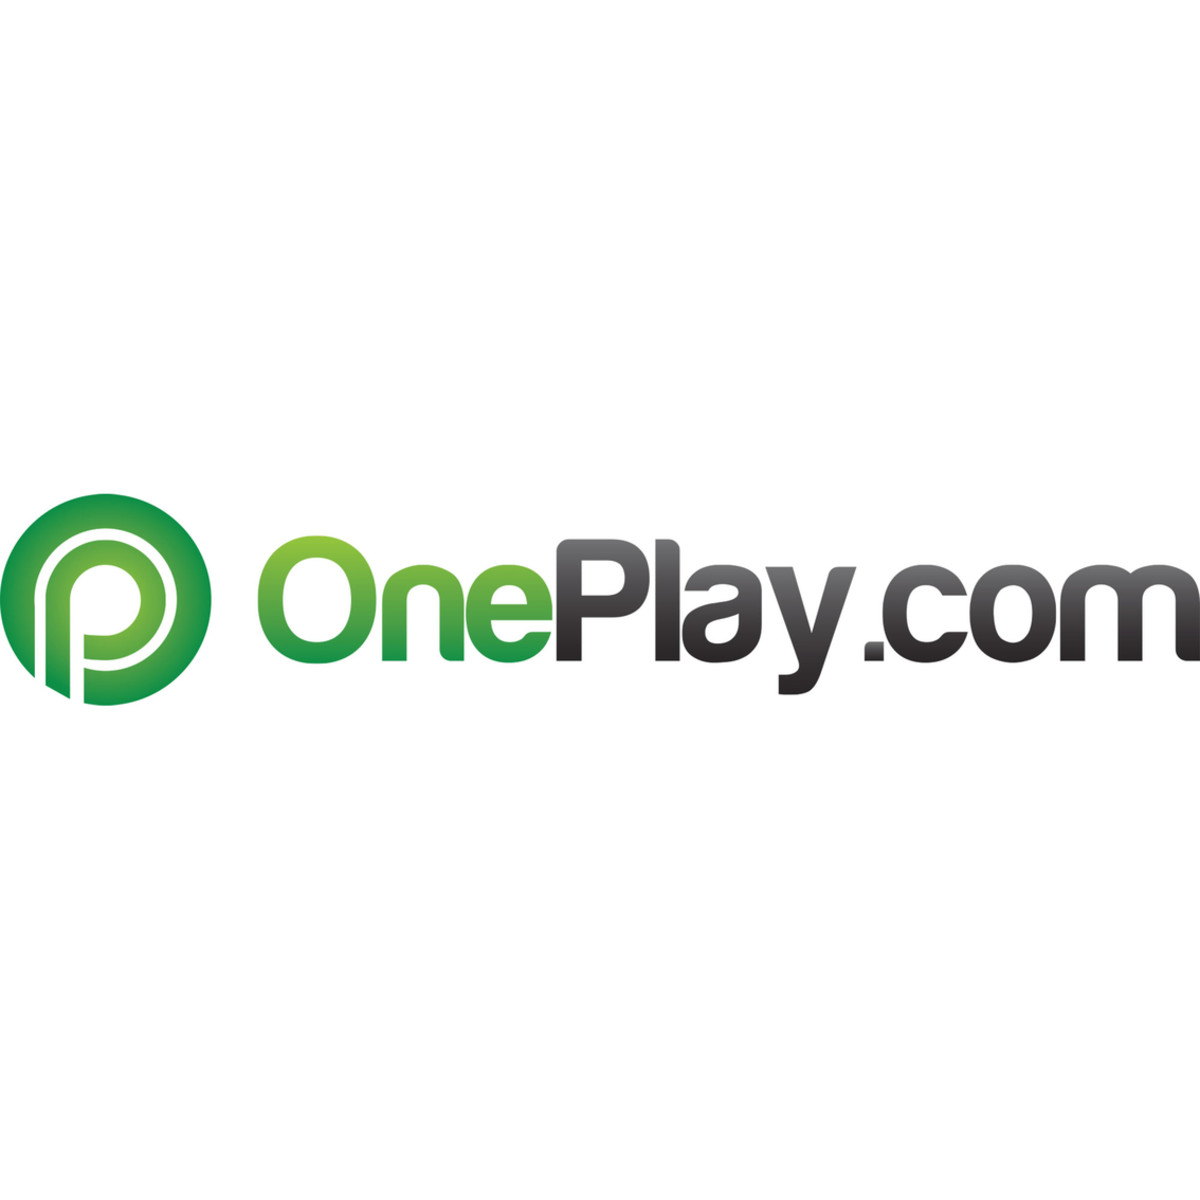 oneplay